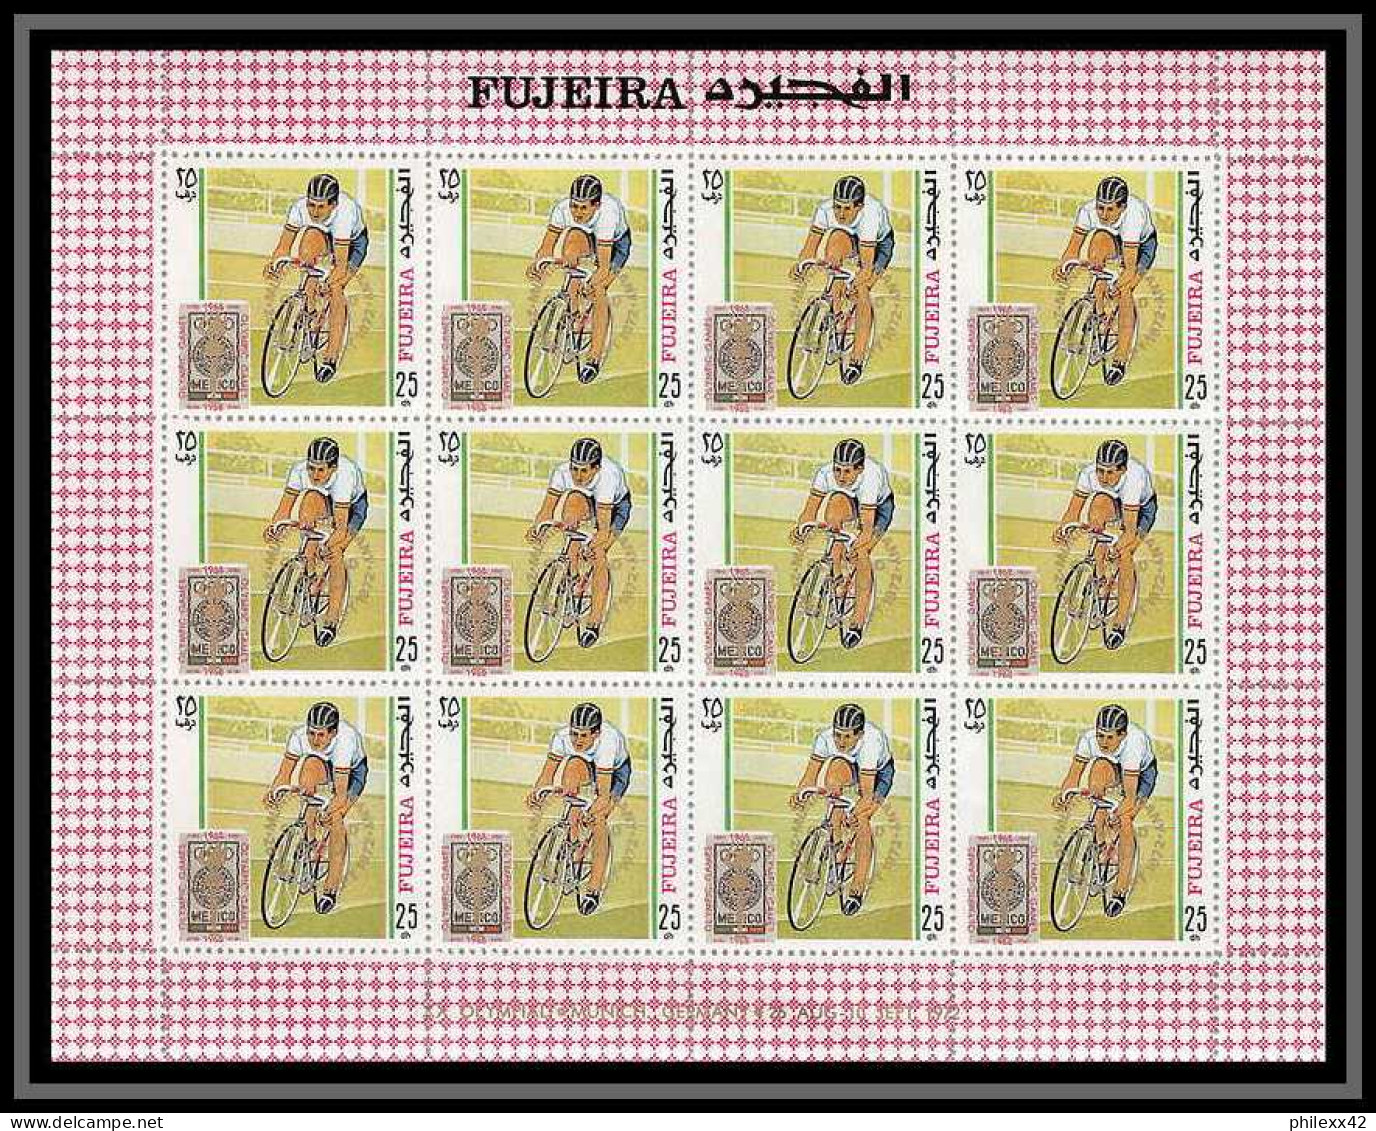 183a Fujeira MNH ** N° 320 / 329 A overprint gold jeux olympiques (olympic games) mexico 68 cycling feuilles (sheets)